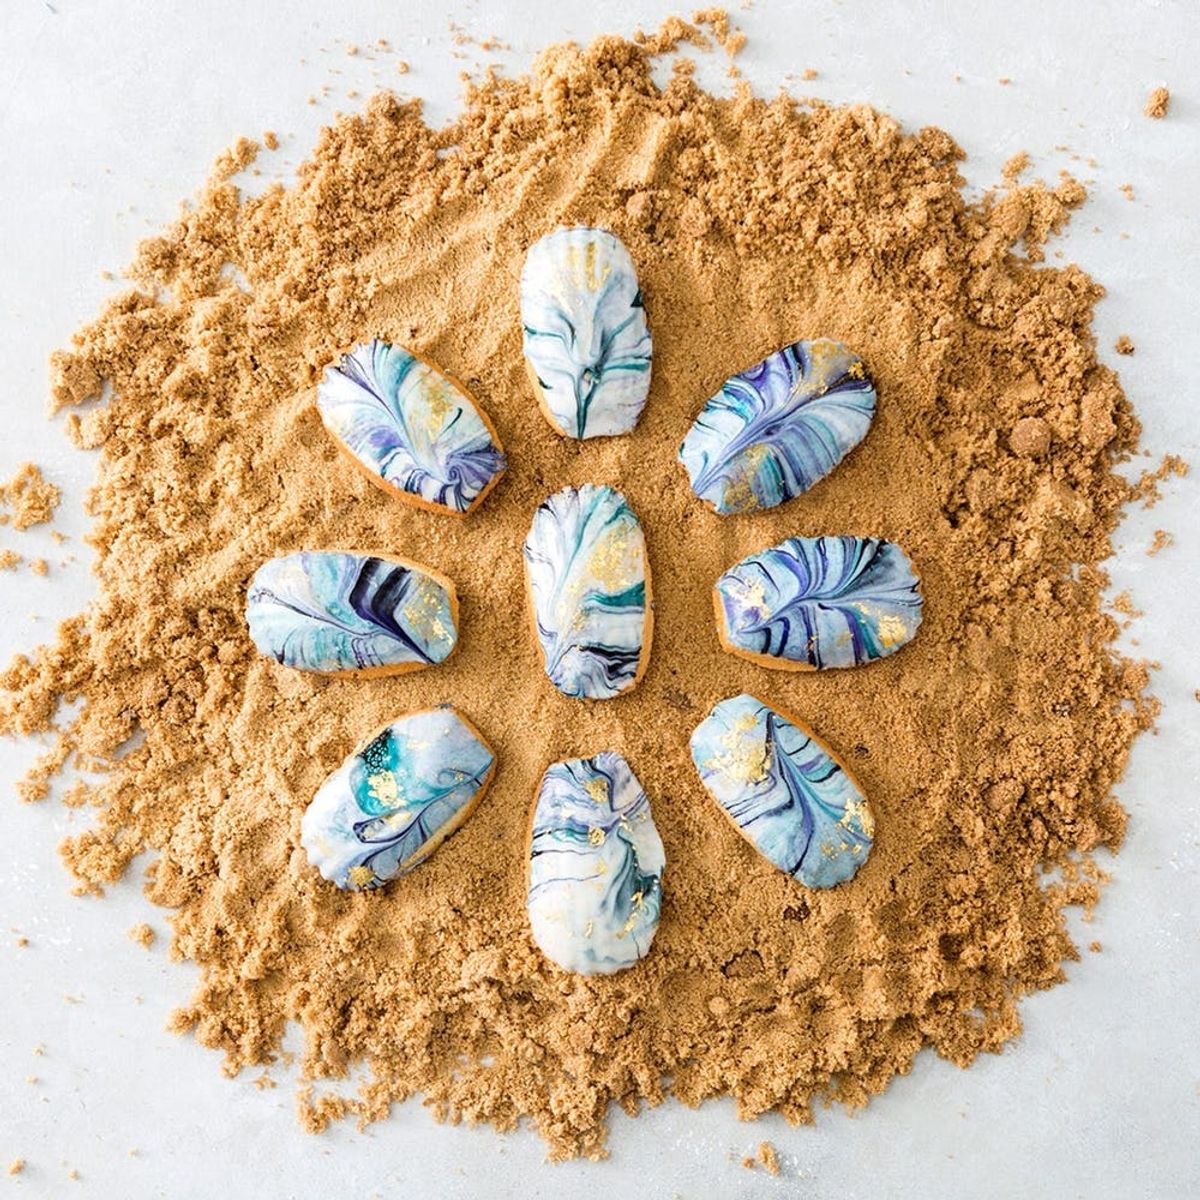 Mermaid Lovers: This Is How You Turn Store-Bought Cookies into Magical Works of Art